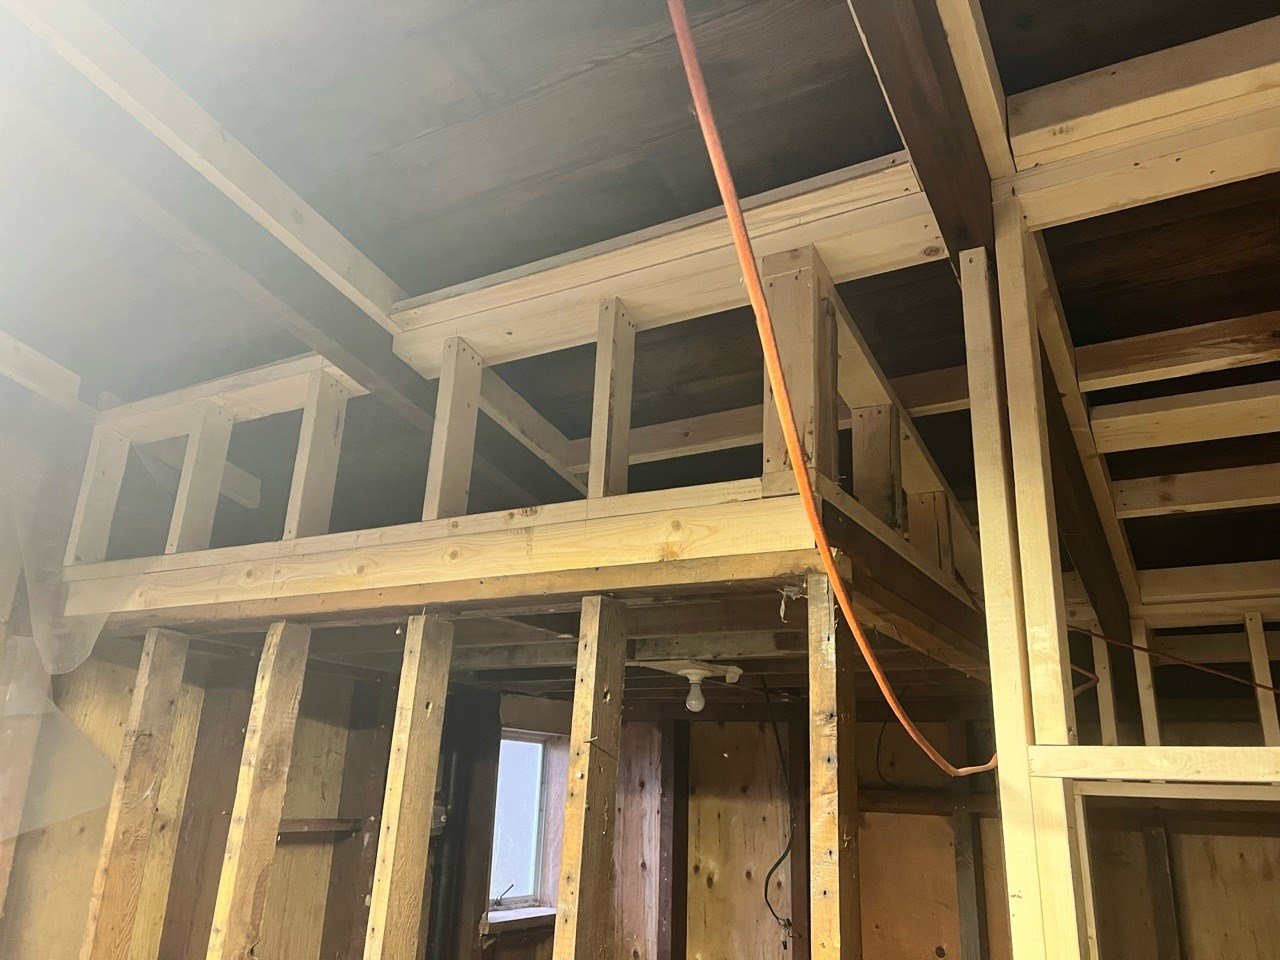  Drop ceiling framing fitted 